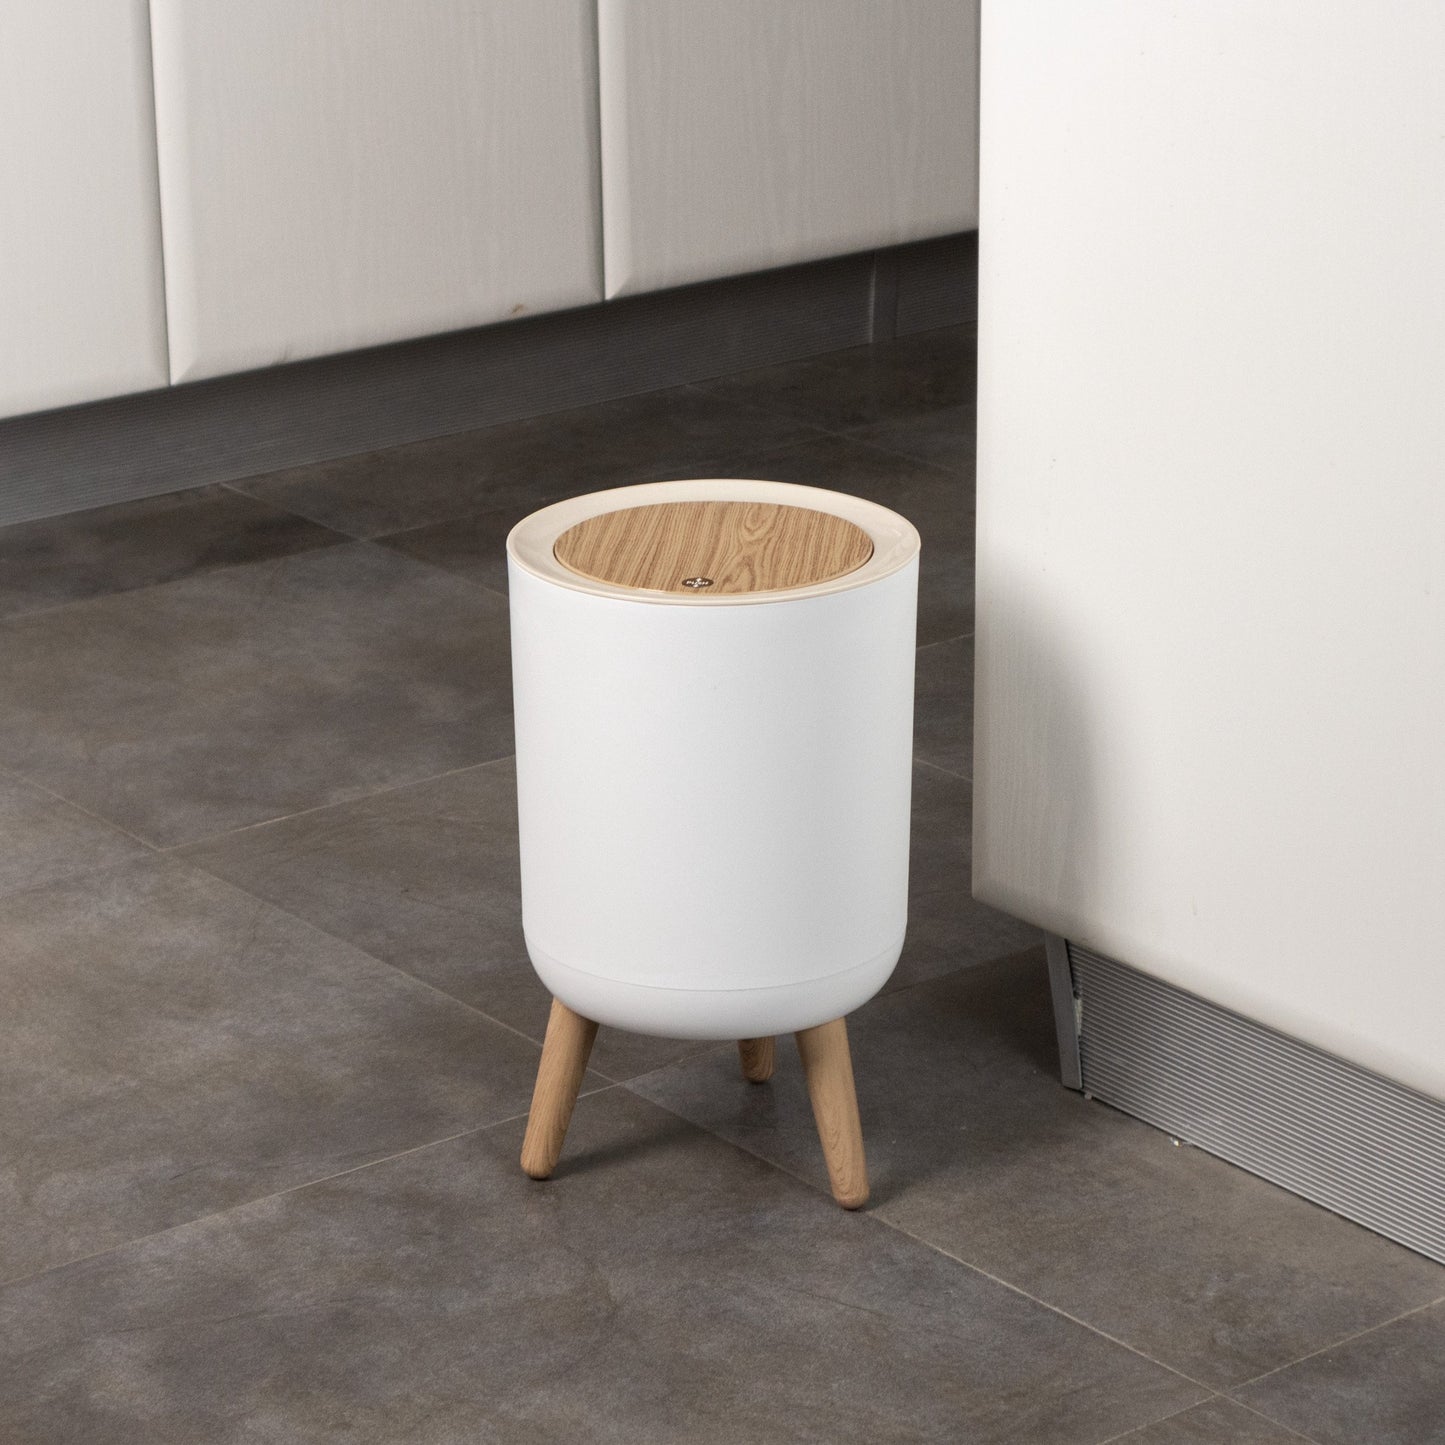 MALMO touch 7L bathroom floor trash can Wood color